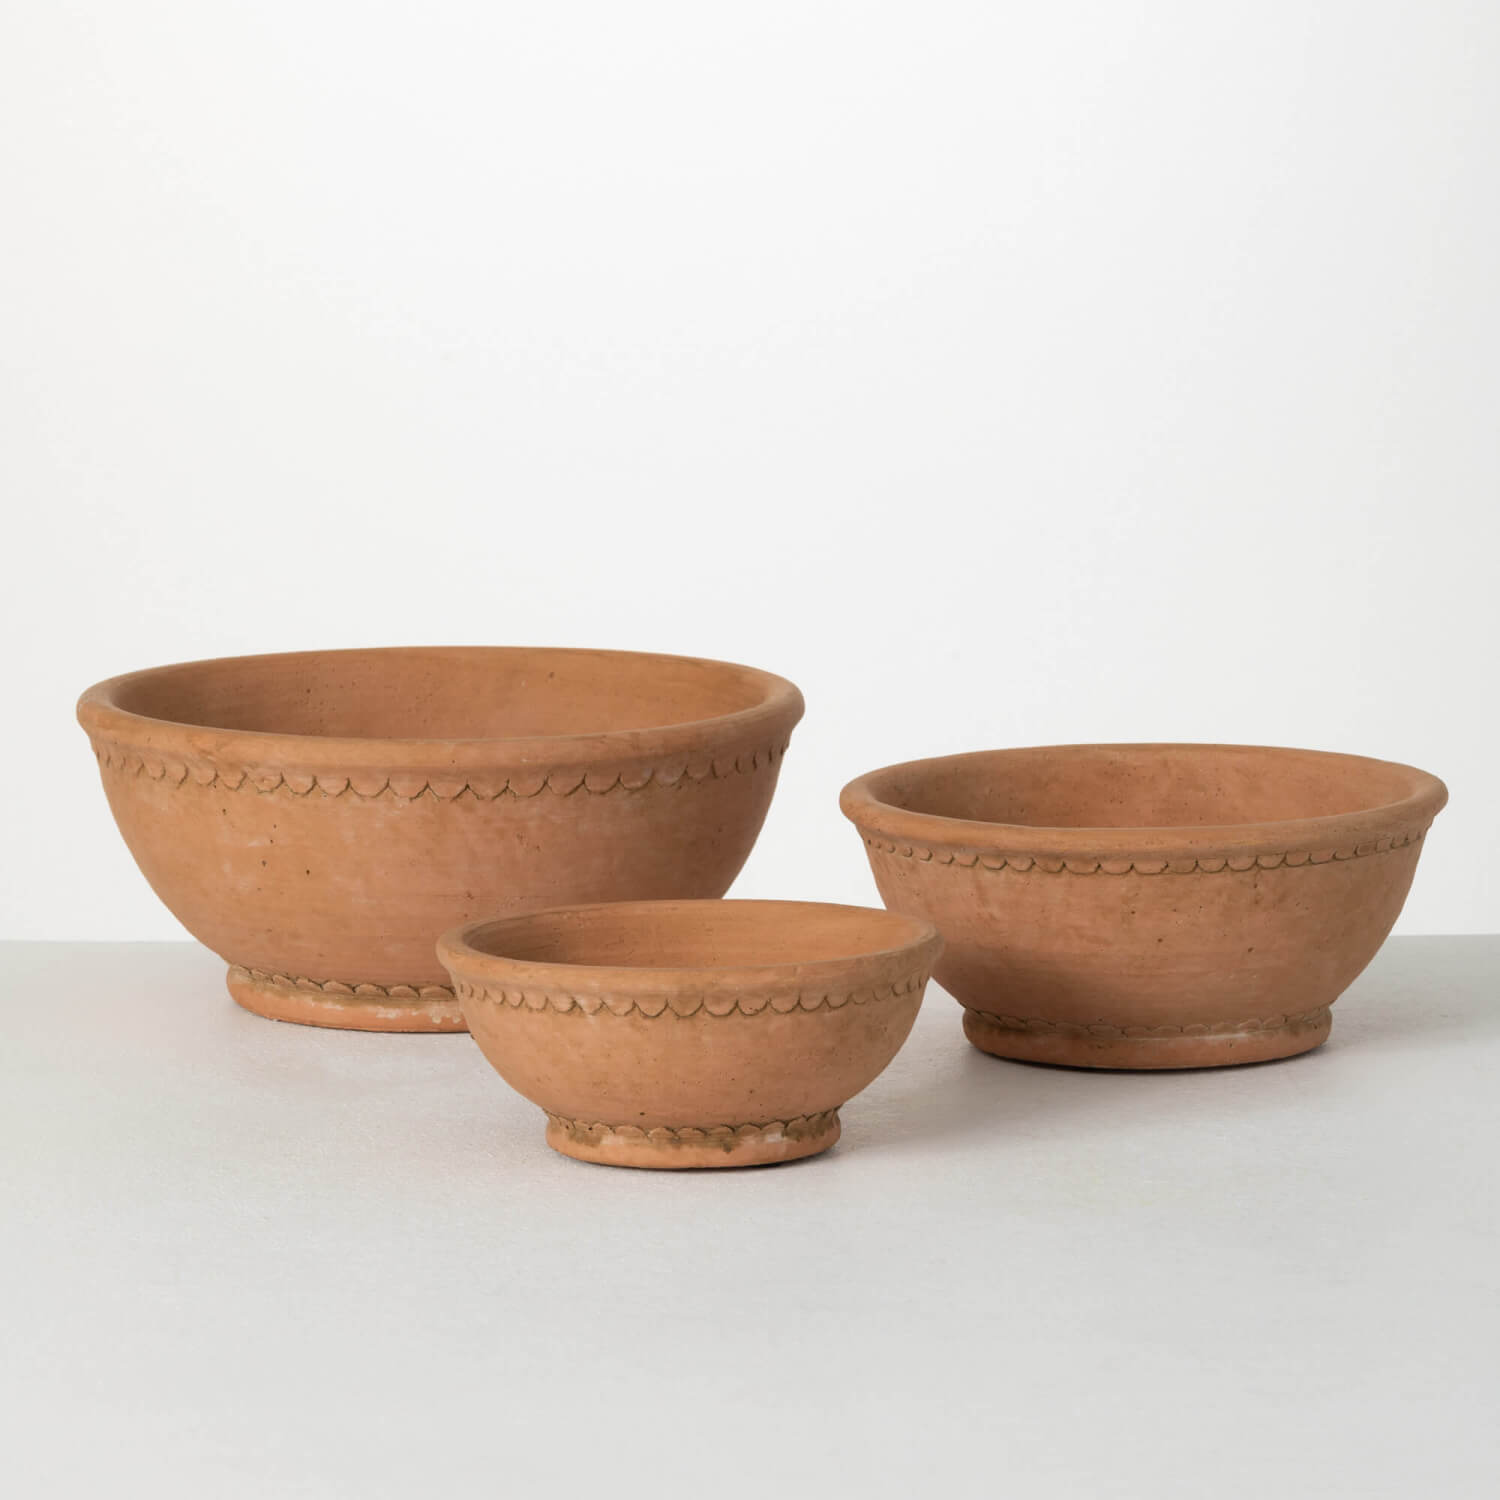 3 sizes of round shallow terracotta pots.